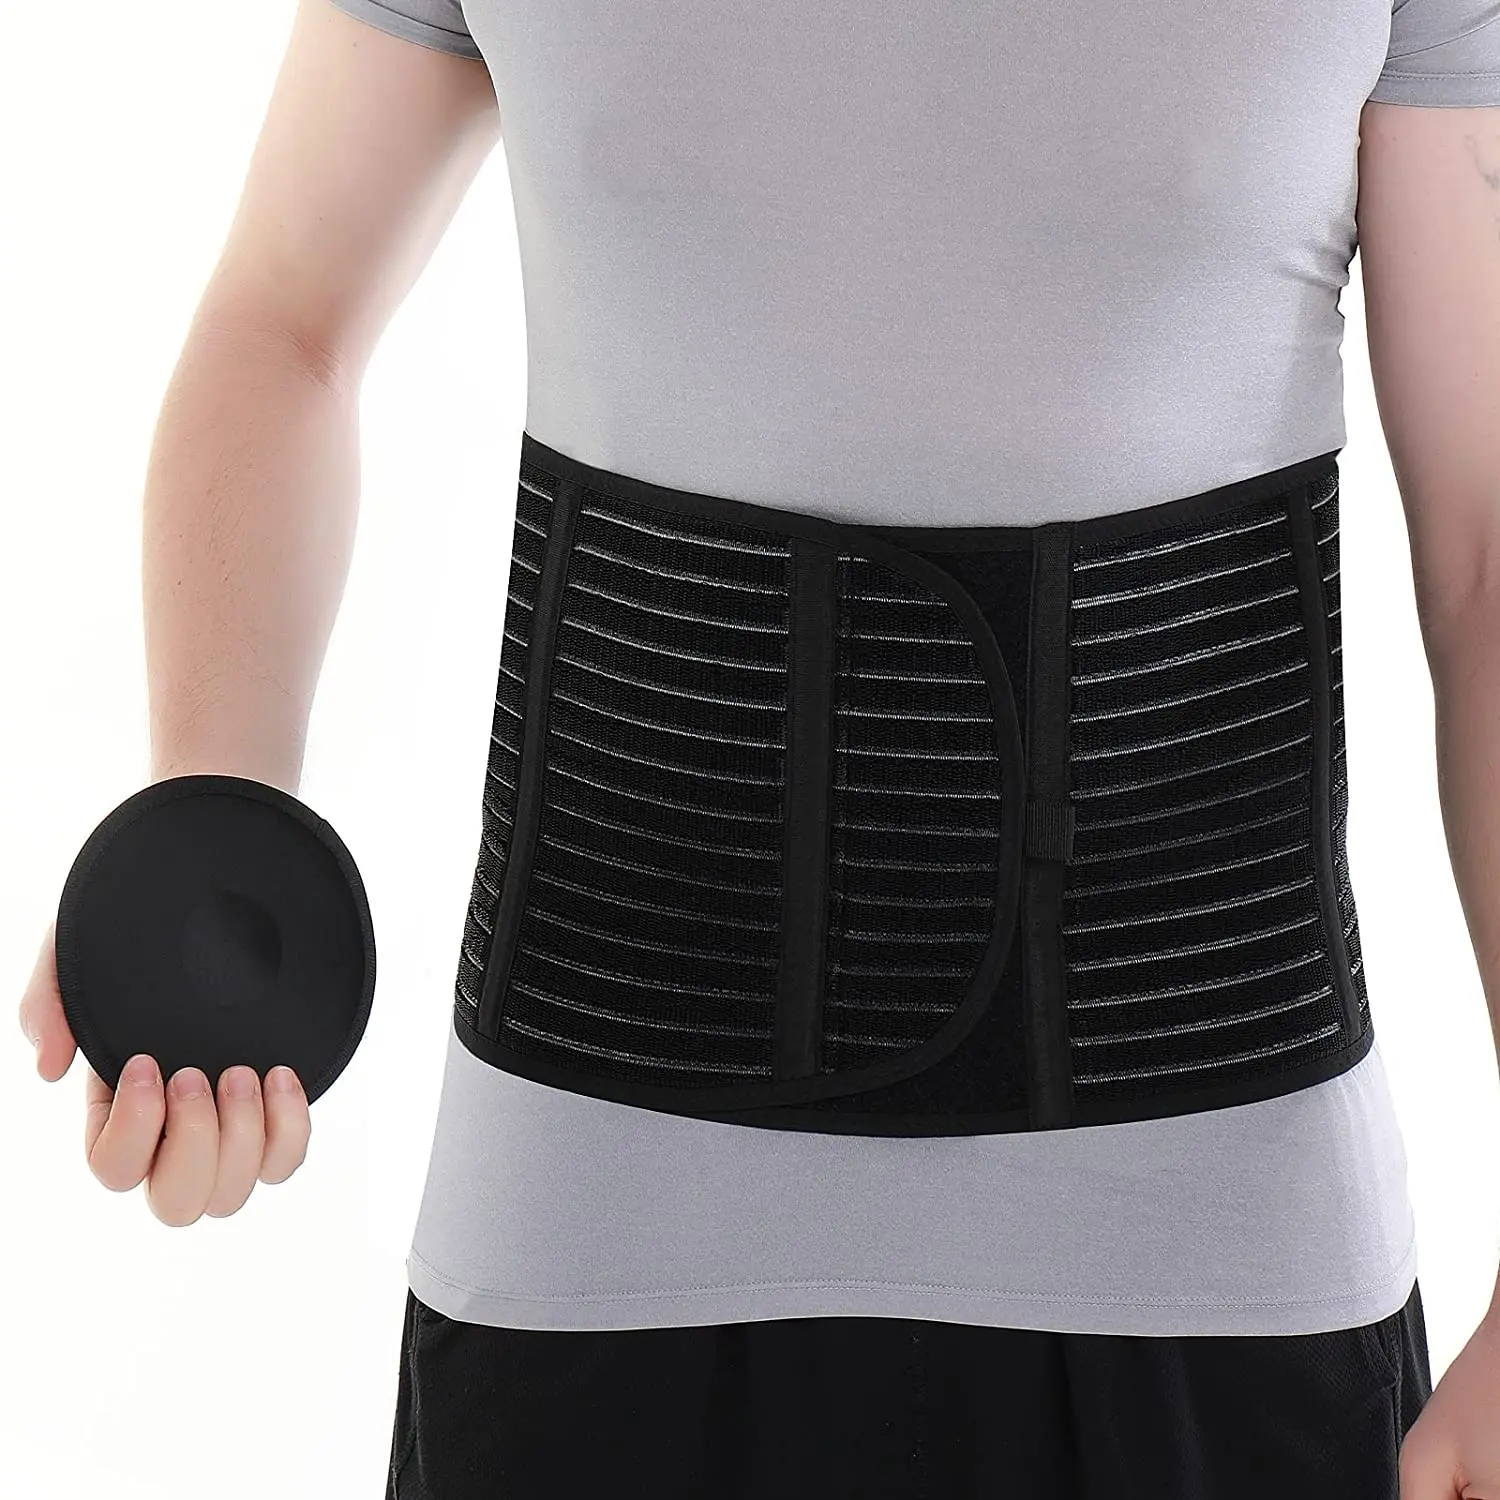 

HKJD Umbilical Hernia Belt for Men and Women Abdominal Hernia Binder With Hernia Support Pad Helps Relieve Pain， for Incisional